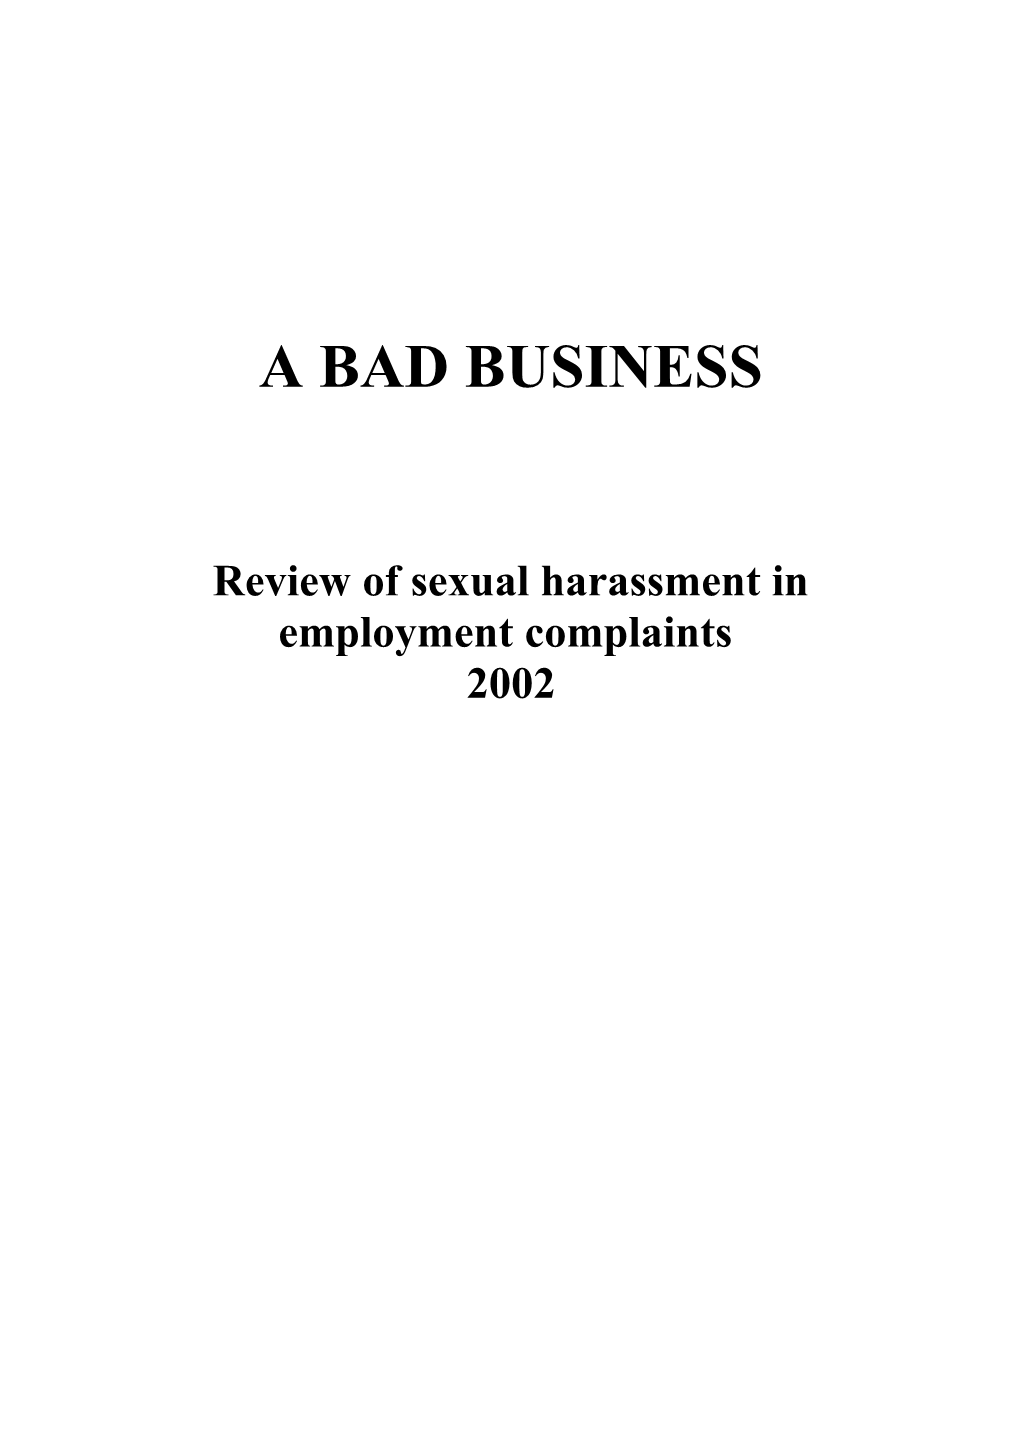 Review of Sexual Harassment in Employment Complaints